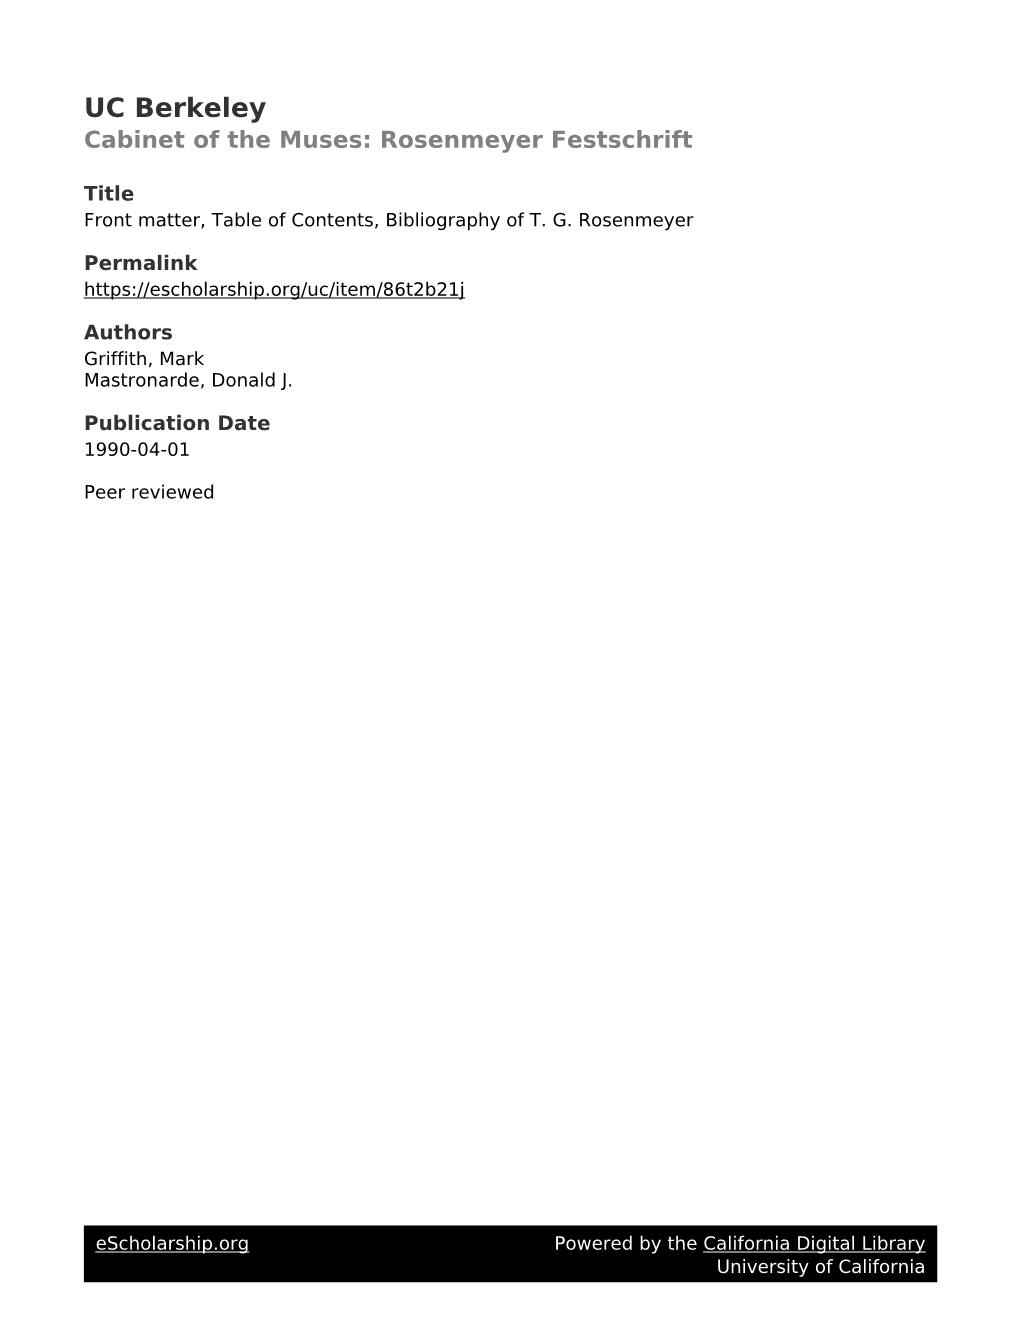 Front Matter, Table of Contents, Bibliography of T. G. Rosenmeyer